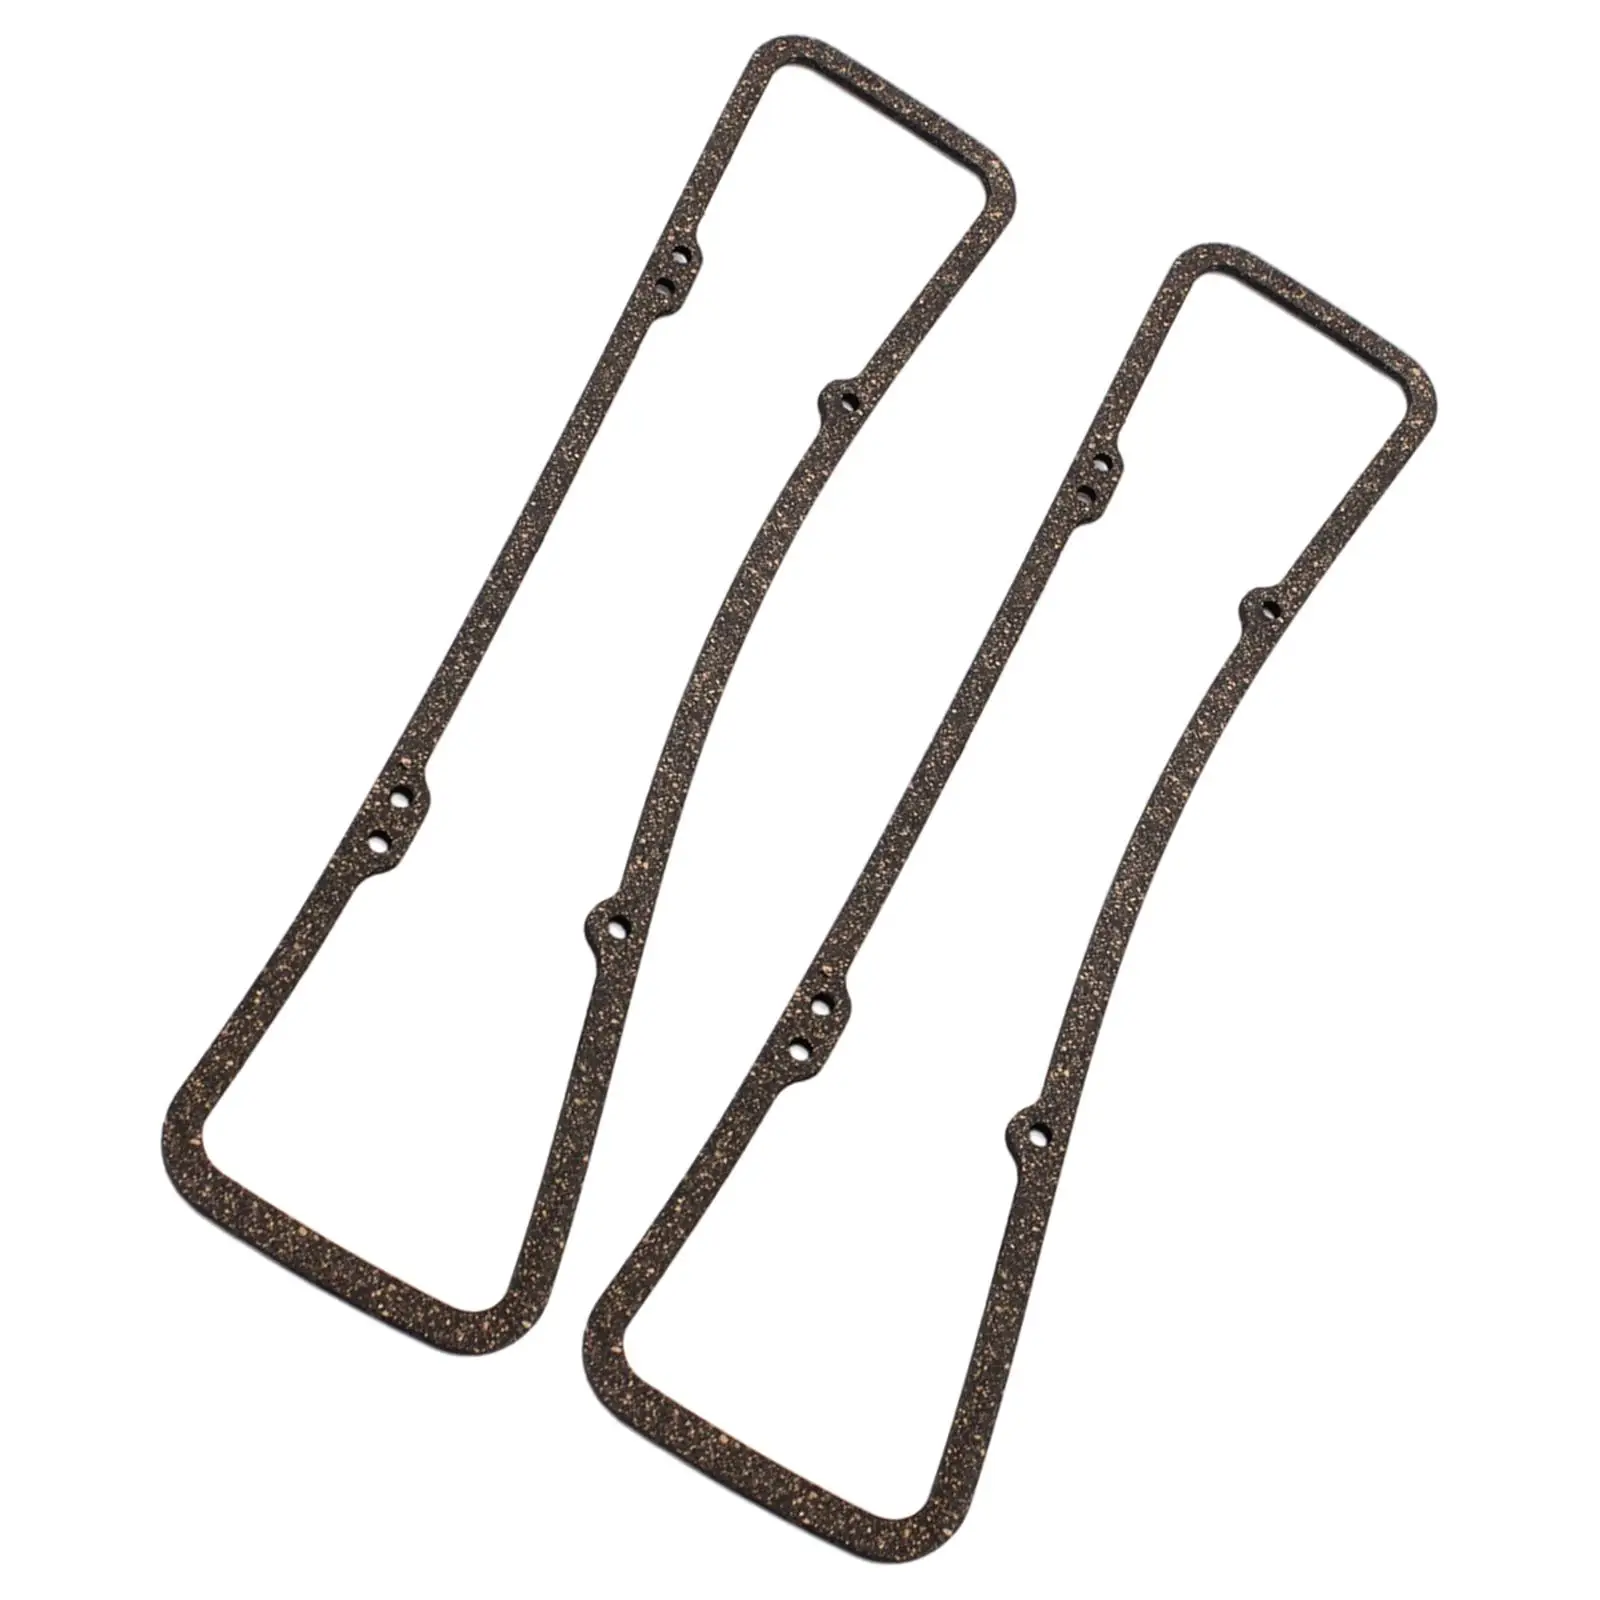 Valve Cover Gaskets Set 7483 2x Fit for 305 327 350 383 400 Engines